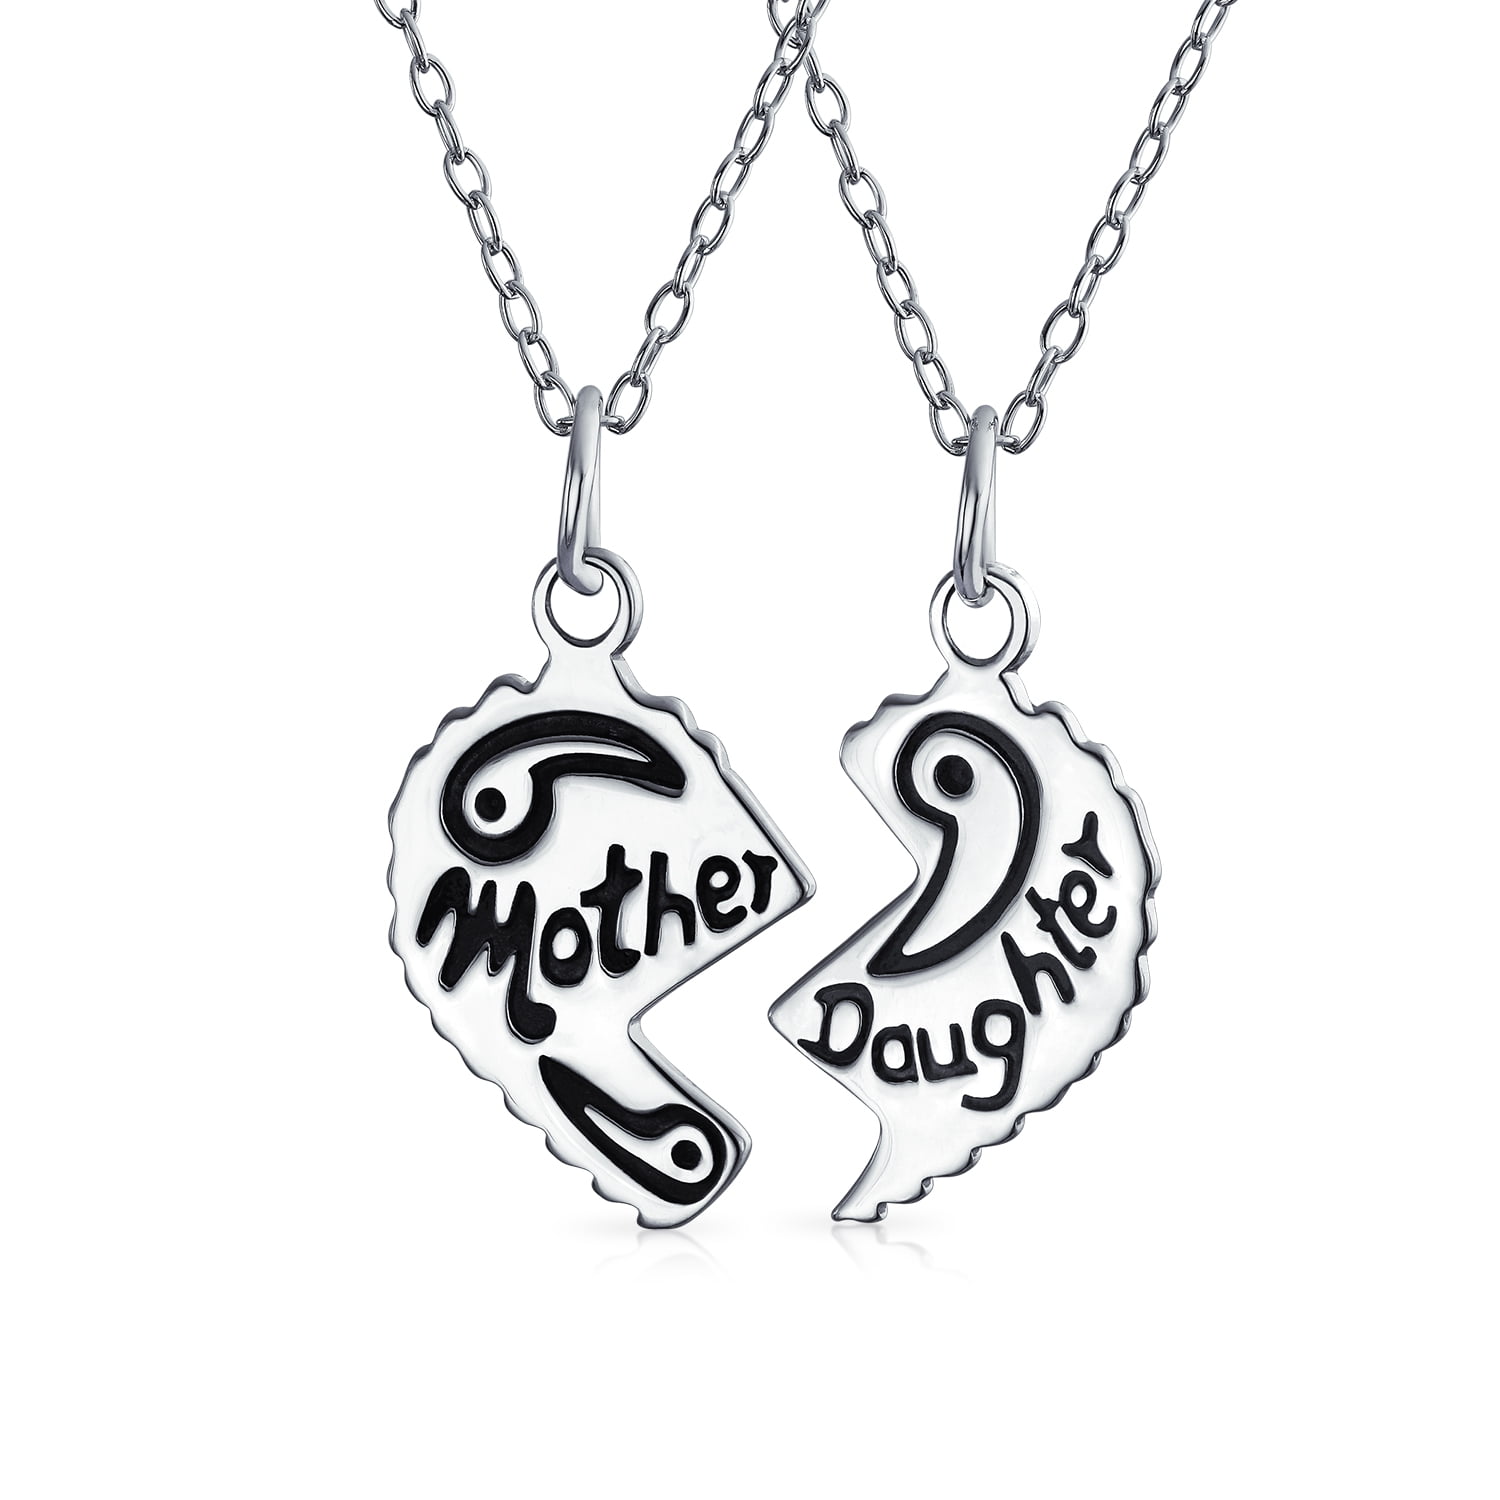 Sterling Silver Mother Daughter Pendant Break Apart Charm Solid 925 Italy New 